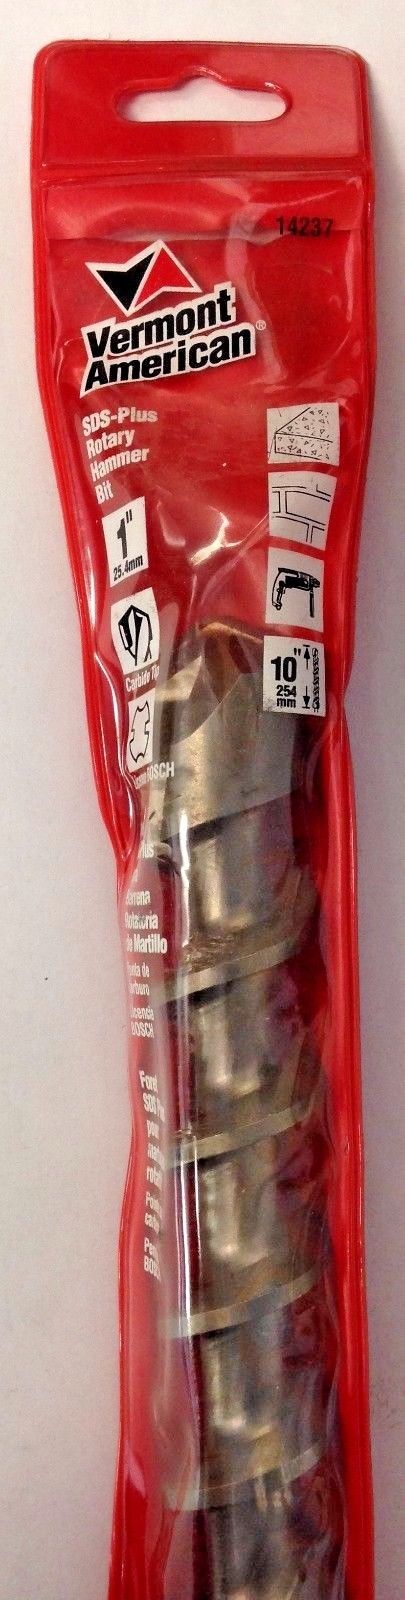 Vermont American 14237 1" x 10" Carbide Tipped SDS Plus Rotary Hammer Bit